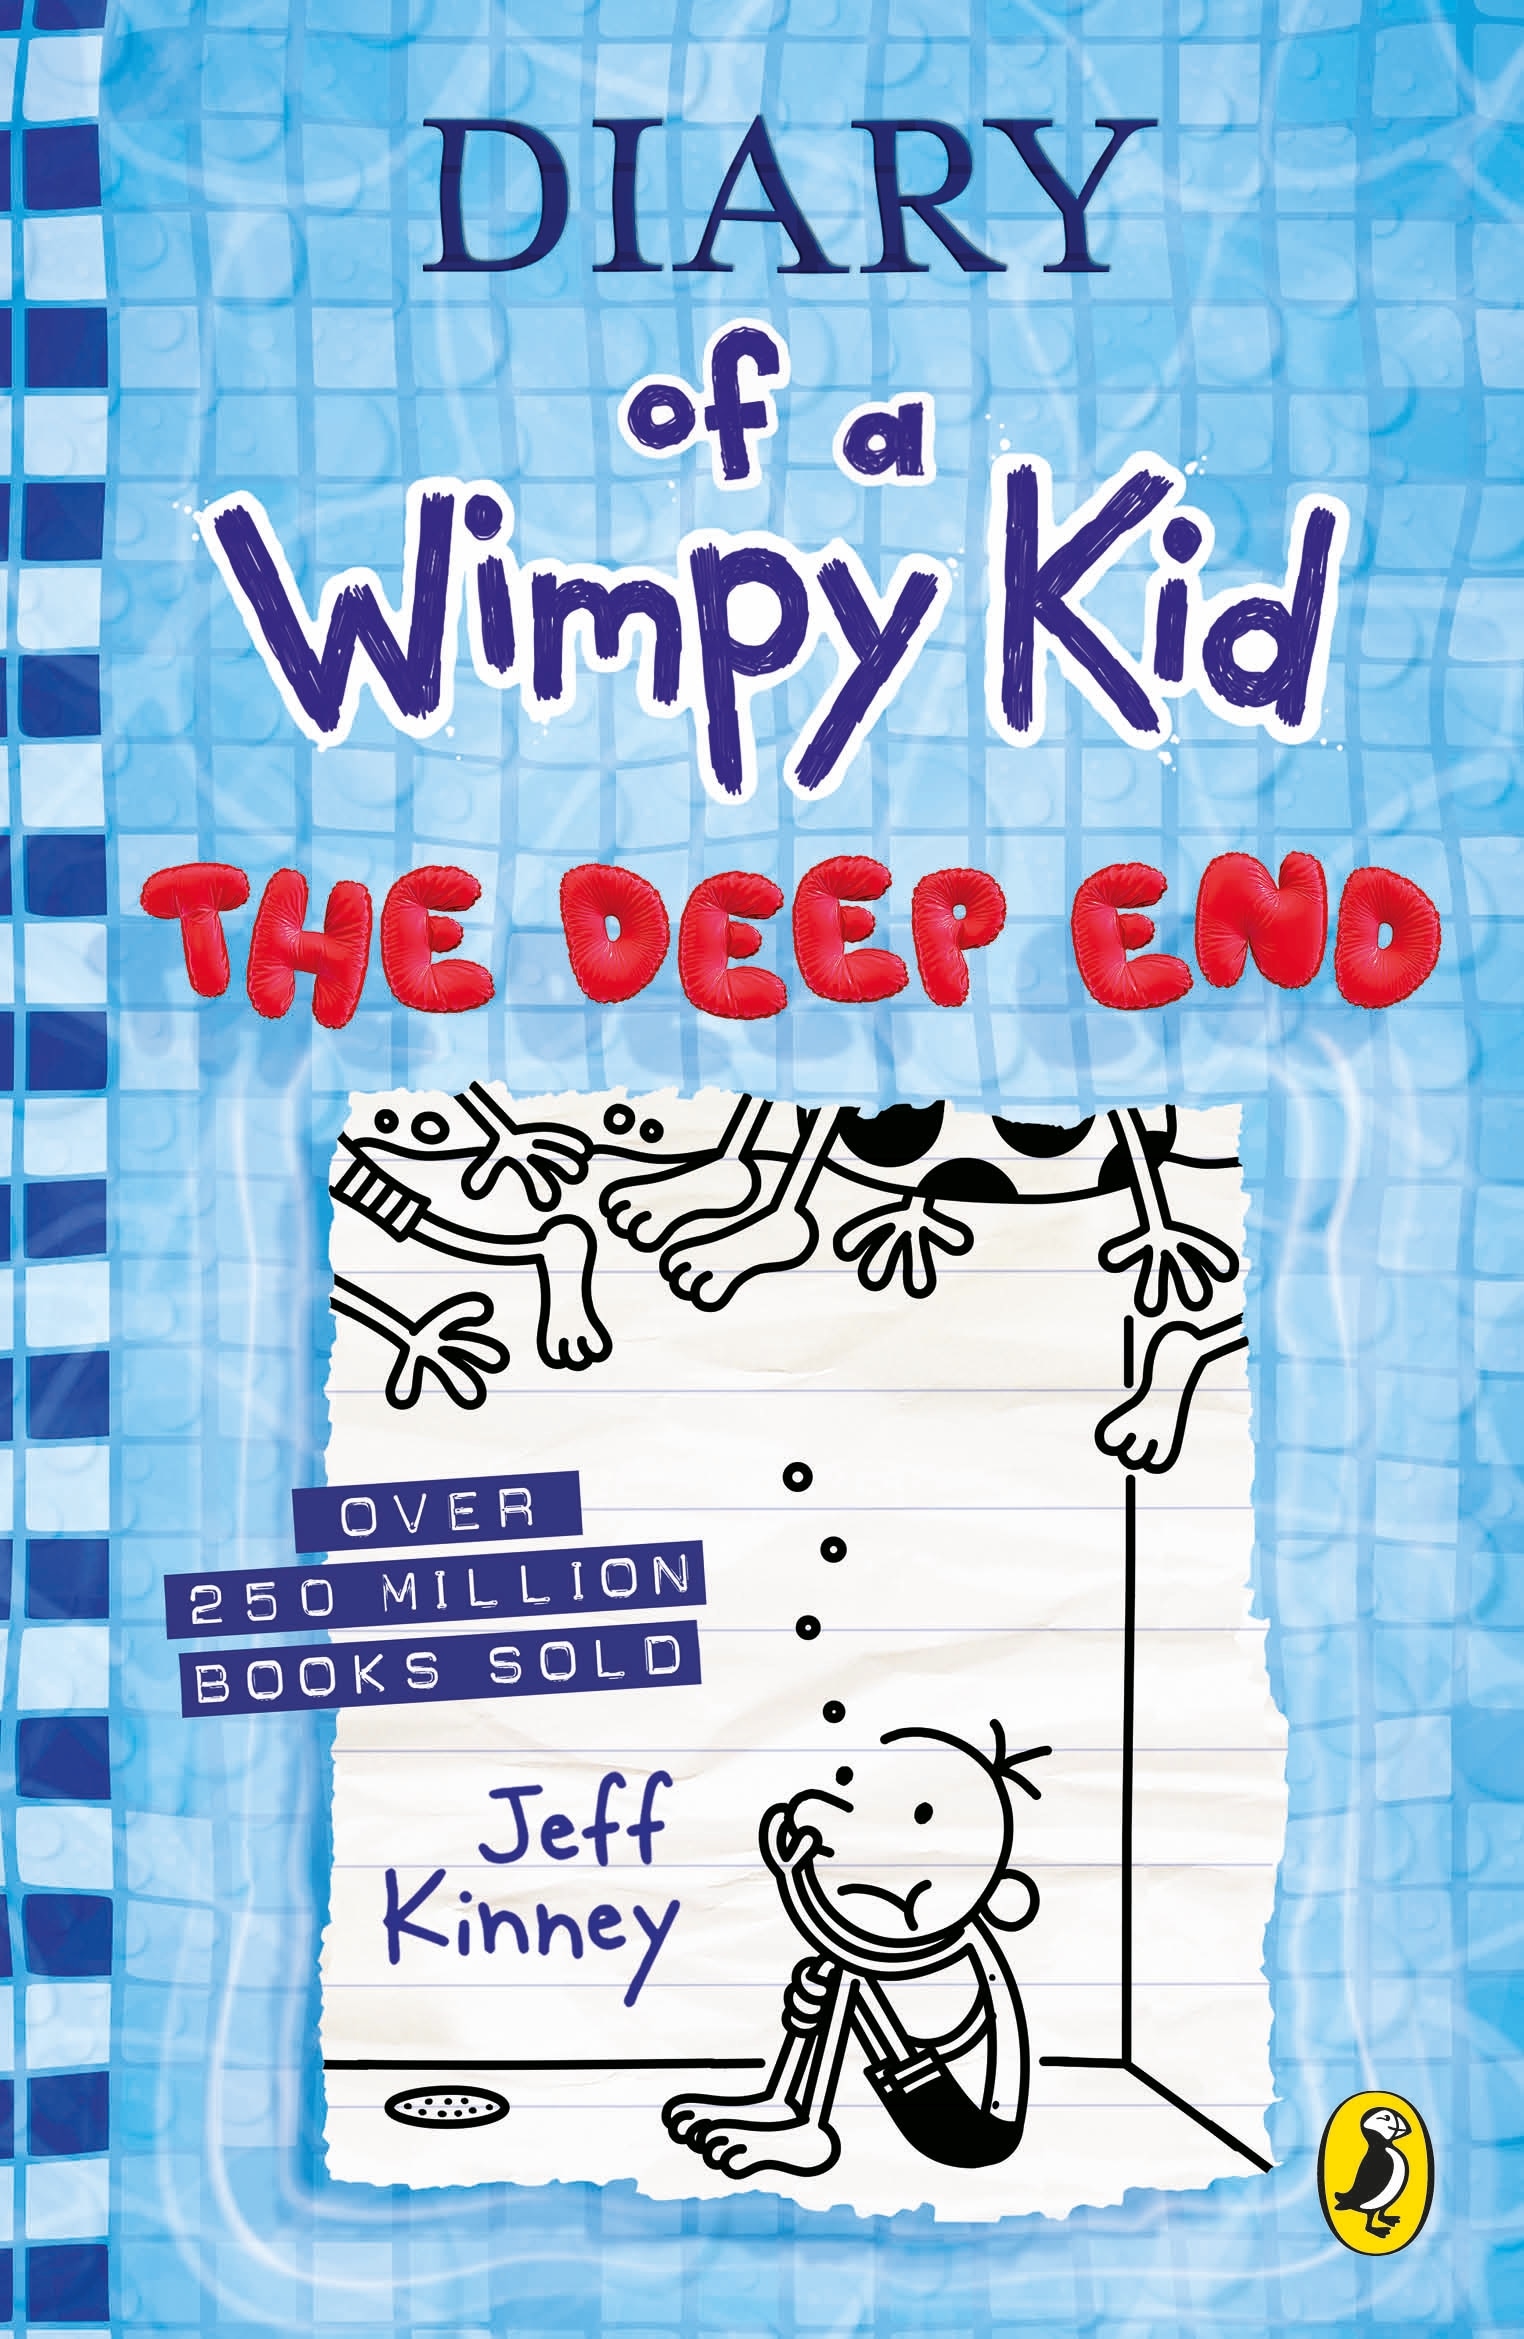 Book “Diary of a Wimpy Kid: The Deep End (Book 15)” by Jeff Kinney — January 20, 2022